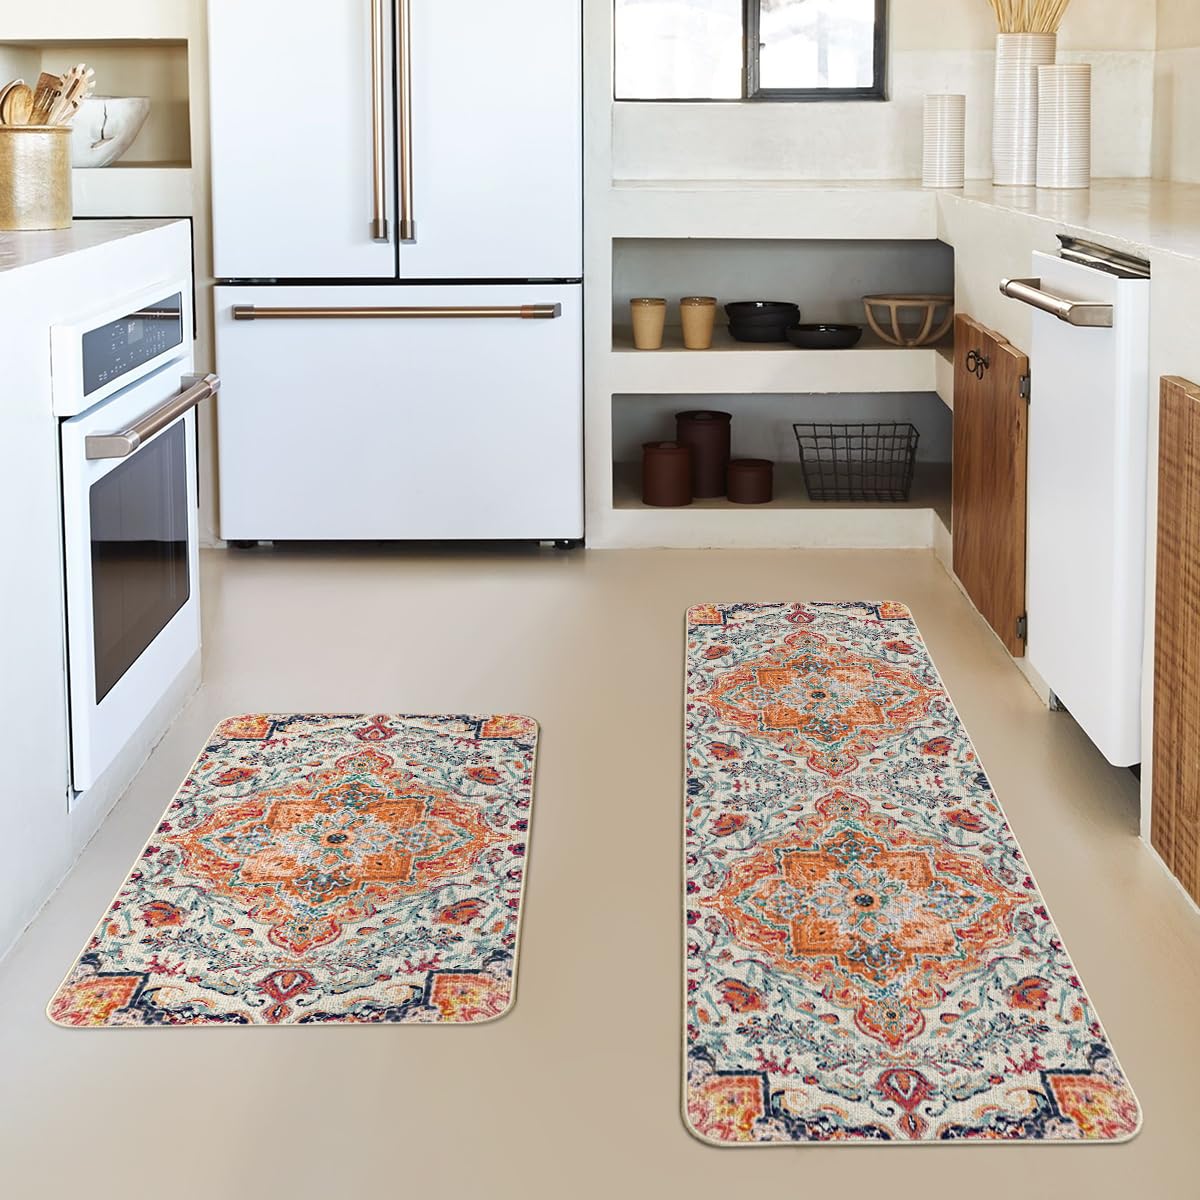 Artoid Mode Orange Flowers Bohemia Kitchen Mats Set of 2, Daily Boho Home Decor Low-Profile Kitchen Rugs for Floor - 17x29 and 17x47 Inch